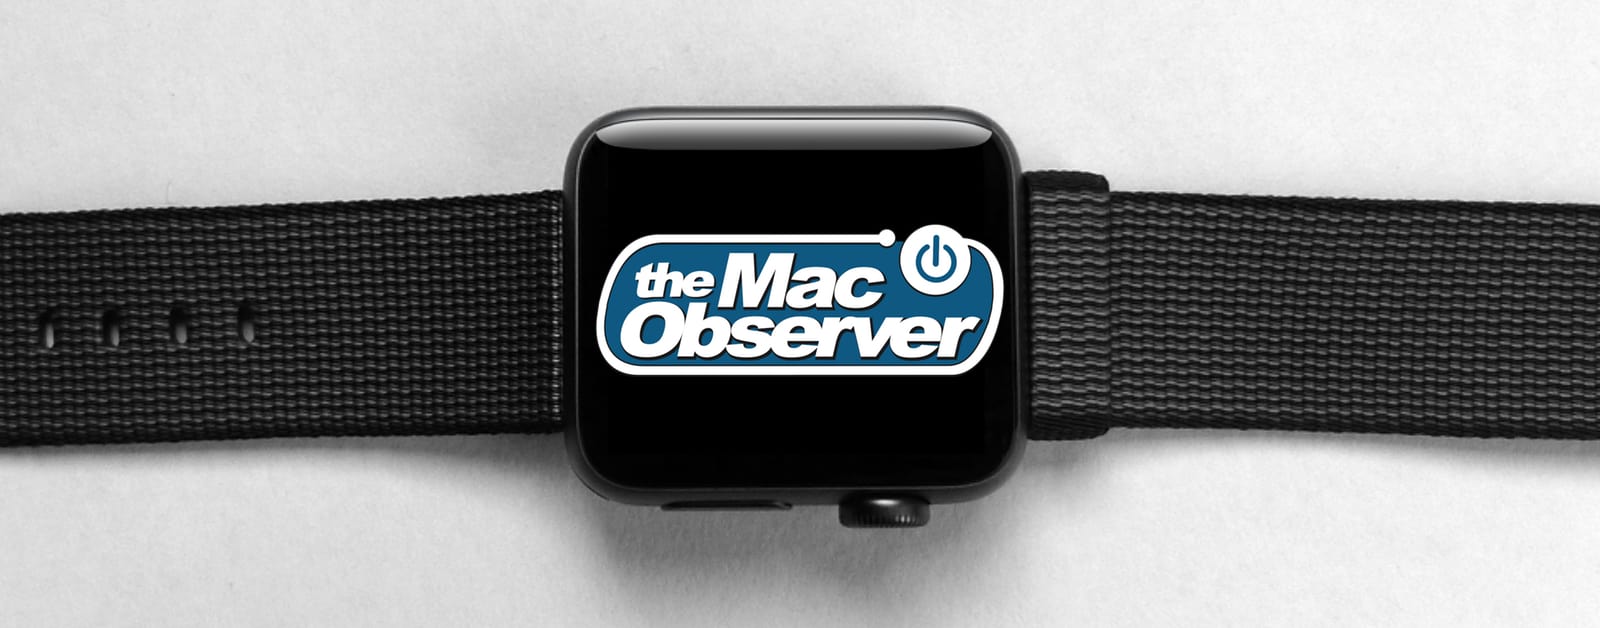 macOS: How To Use Apple Watch to Auto Unlock Your Mac